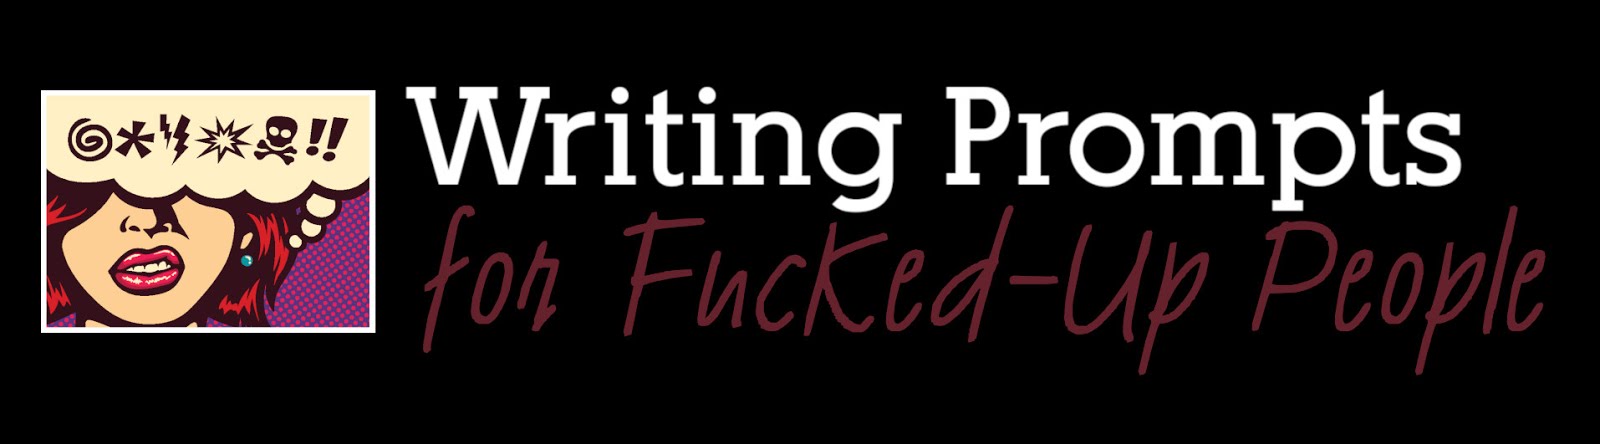 Writing Prompts for Fucked-Up People